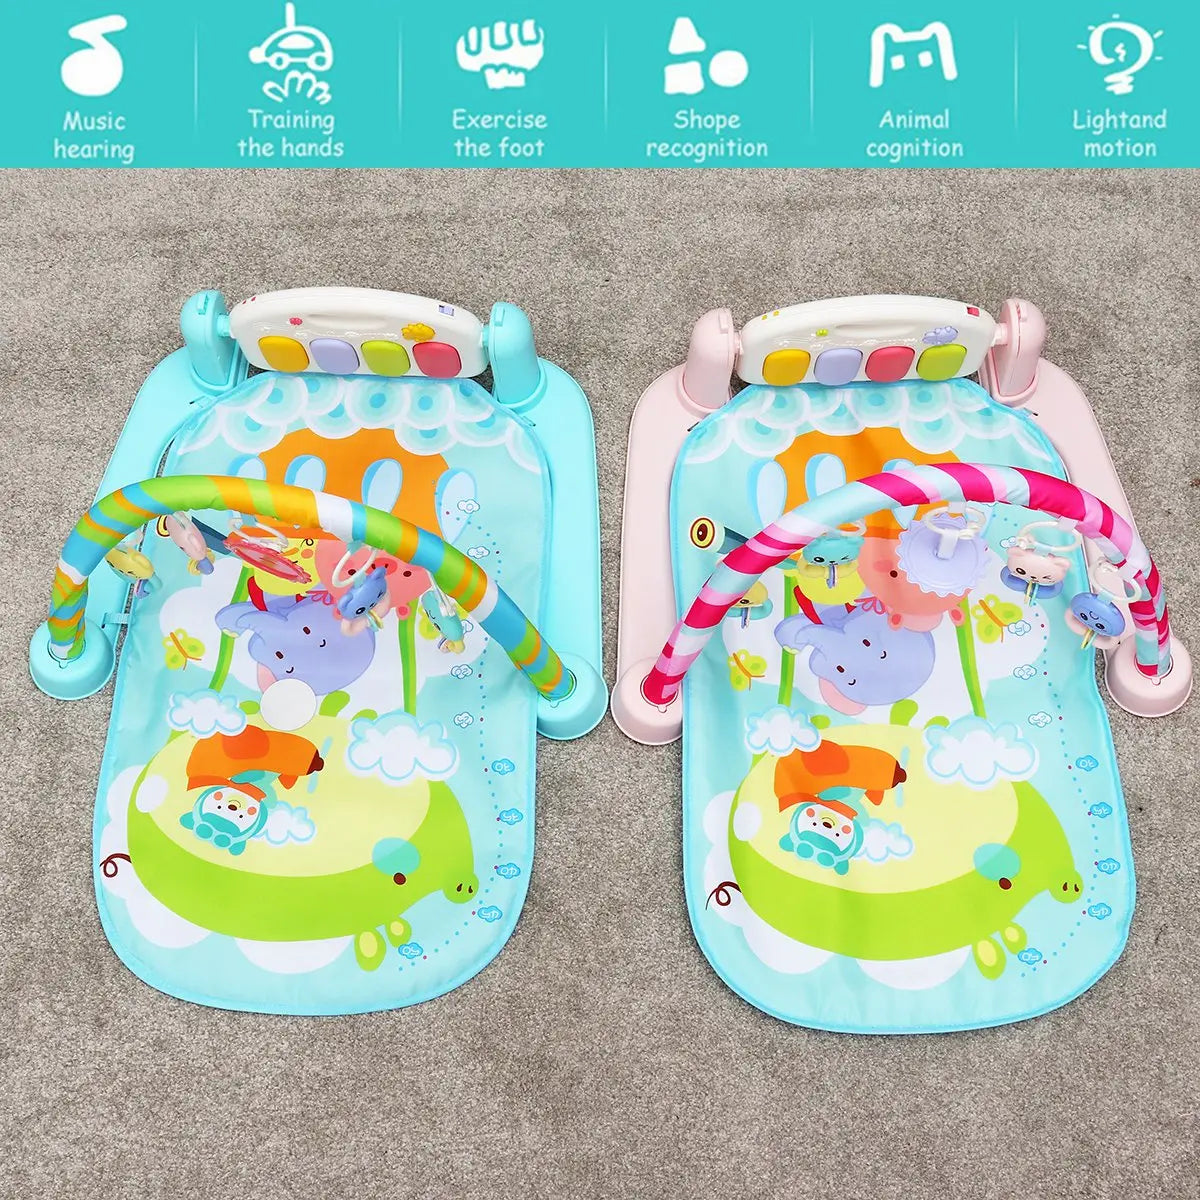 5 In 1 Baby Infant Gym Activity Floor Play Mat Piano Musical